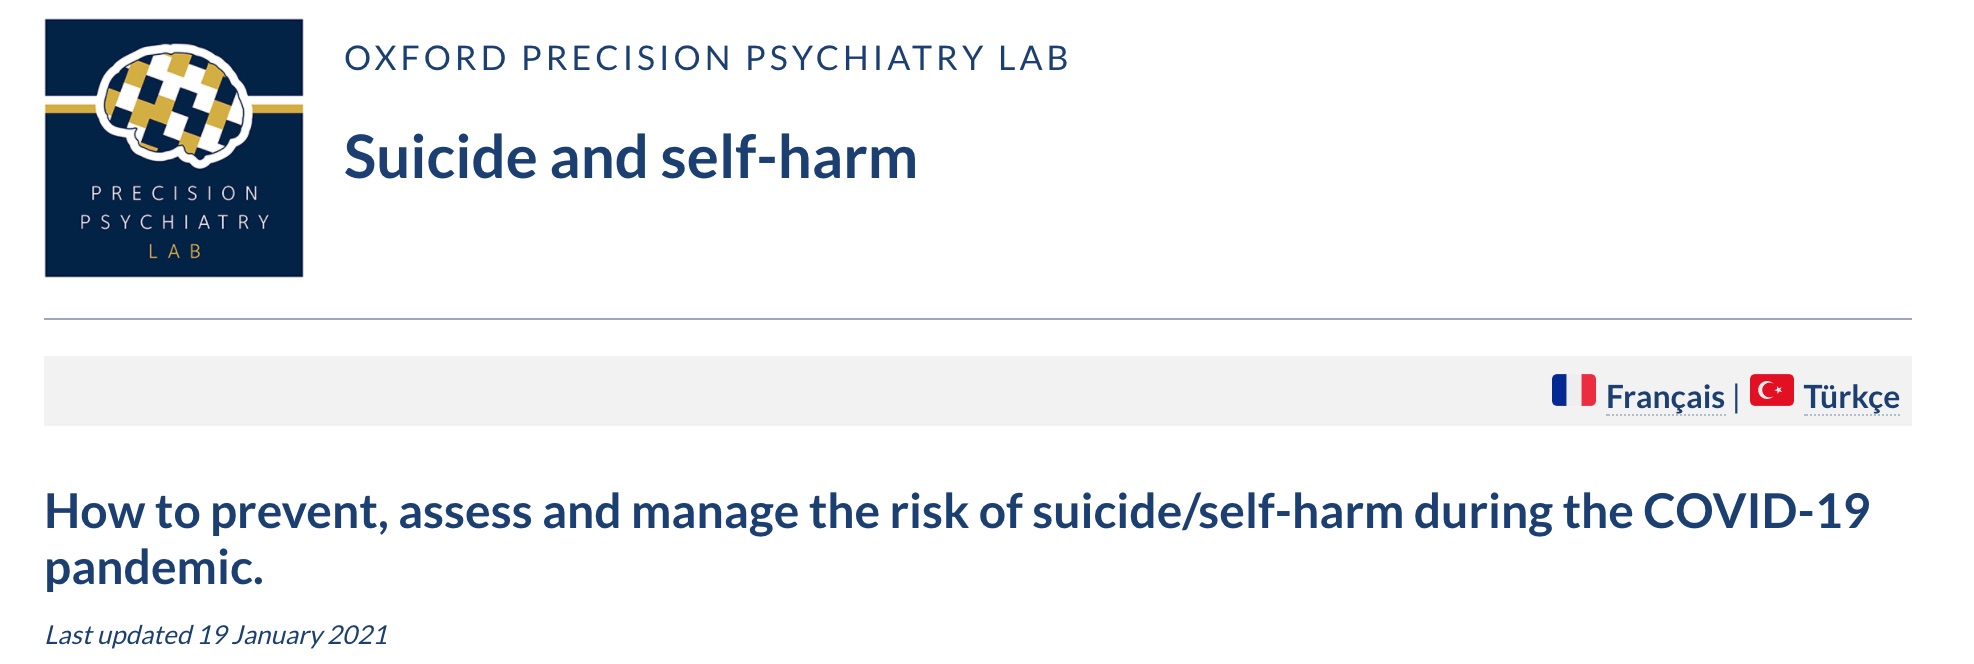 How to prevent, assess and manage the risk of suicide:self-harm during the COVID-19 pandemic